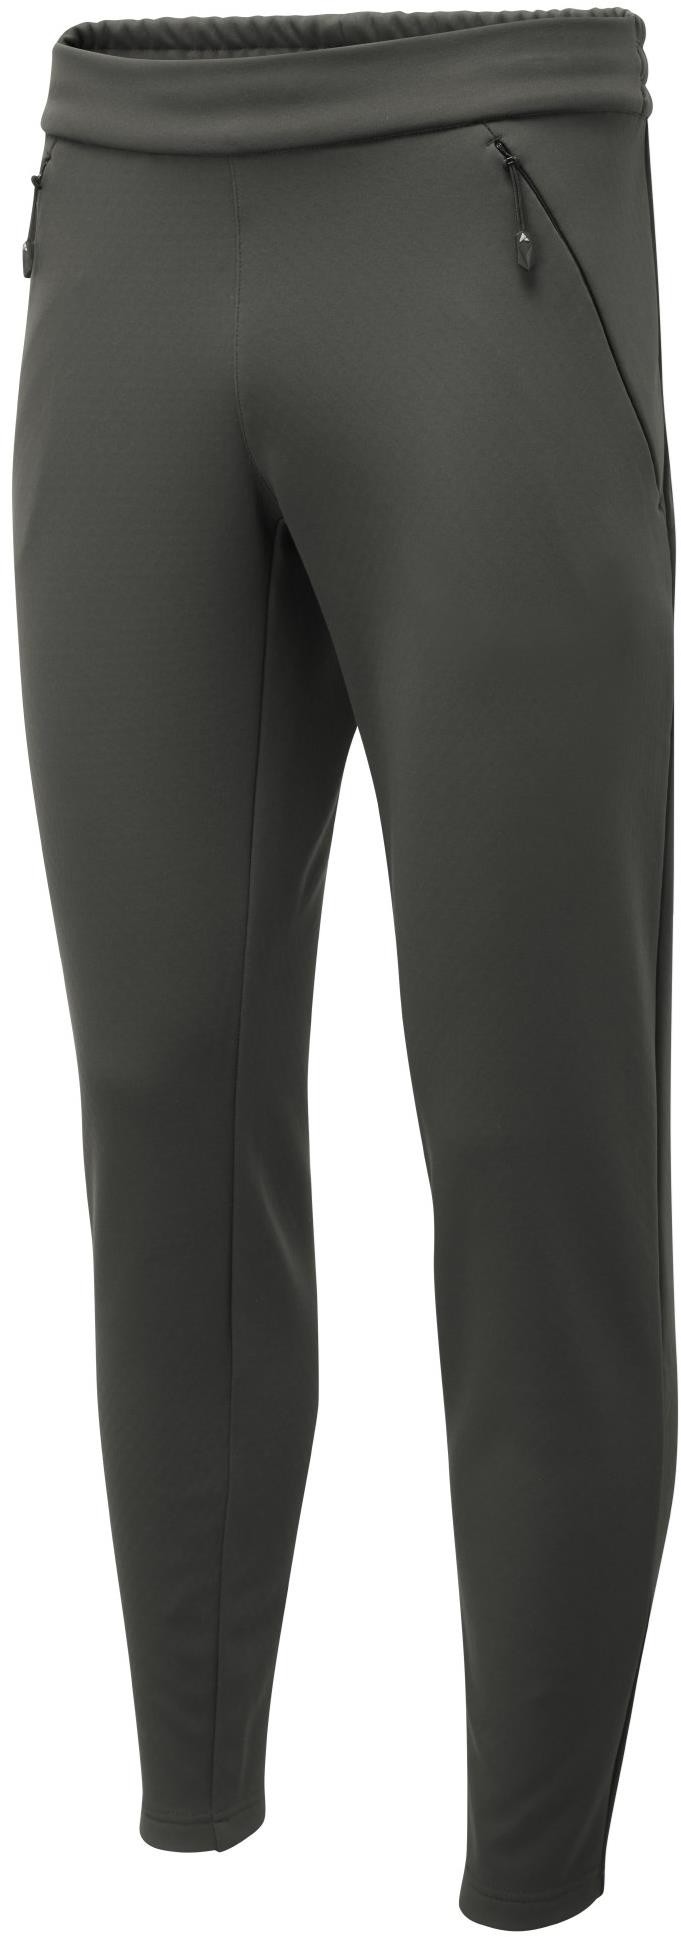 Grid Softshell Trousers image 2